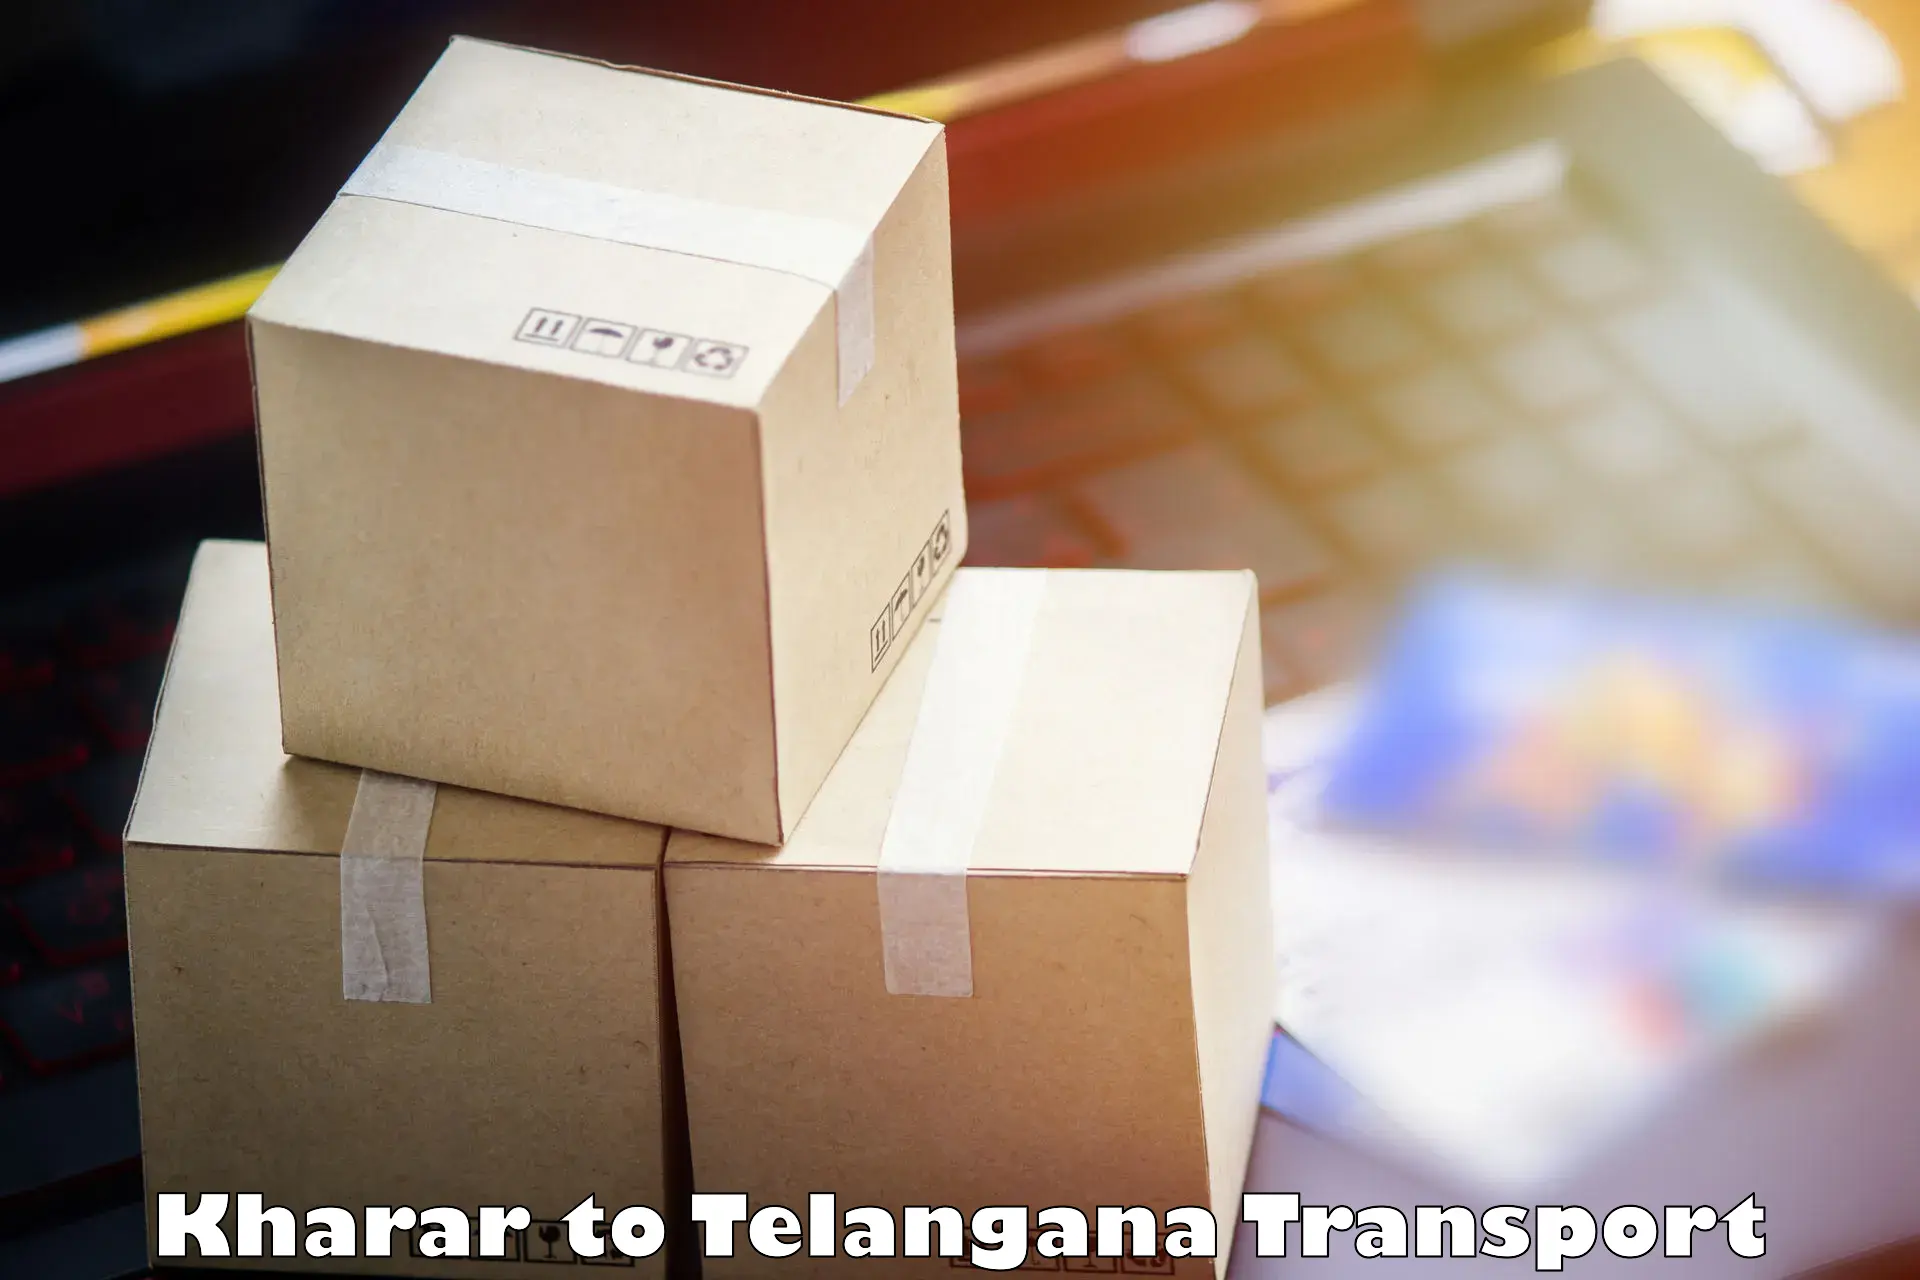 Truck transport companies in India Kharar to Medchal